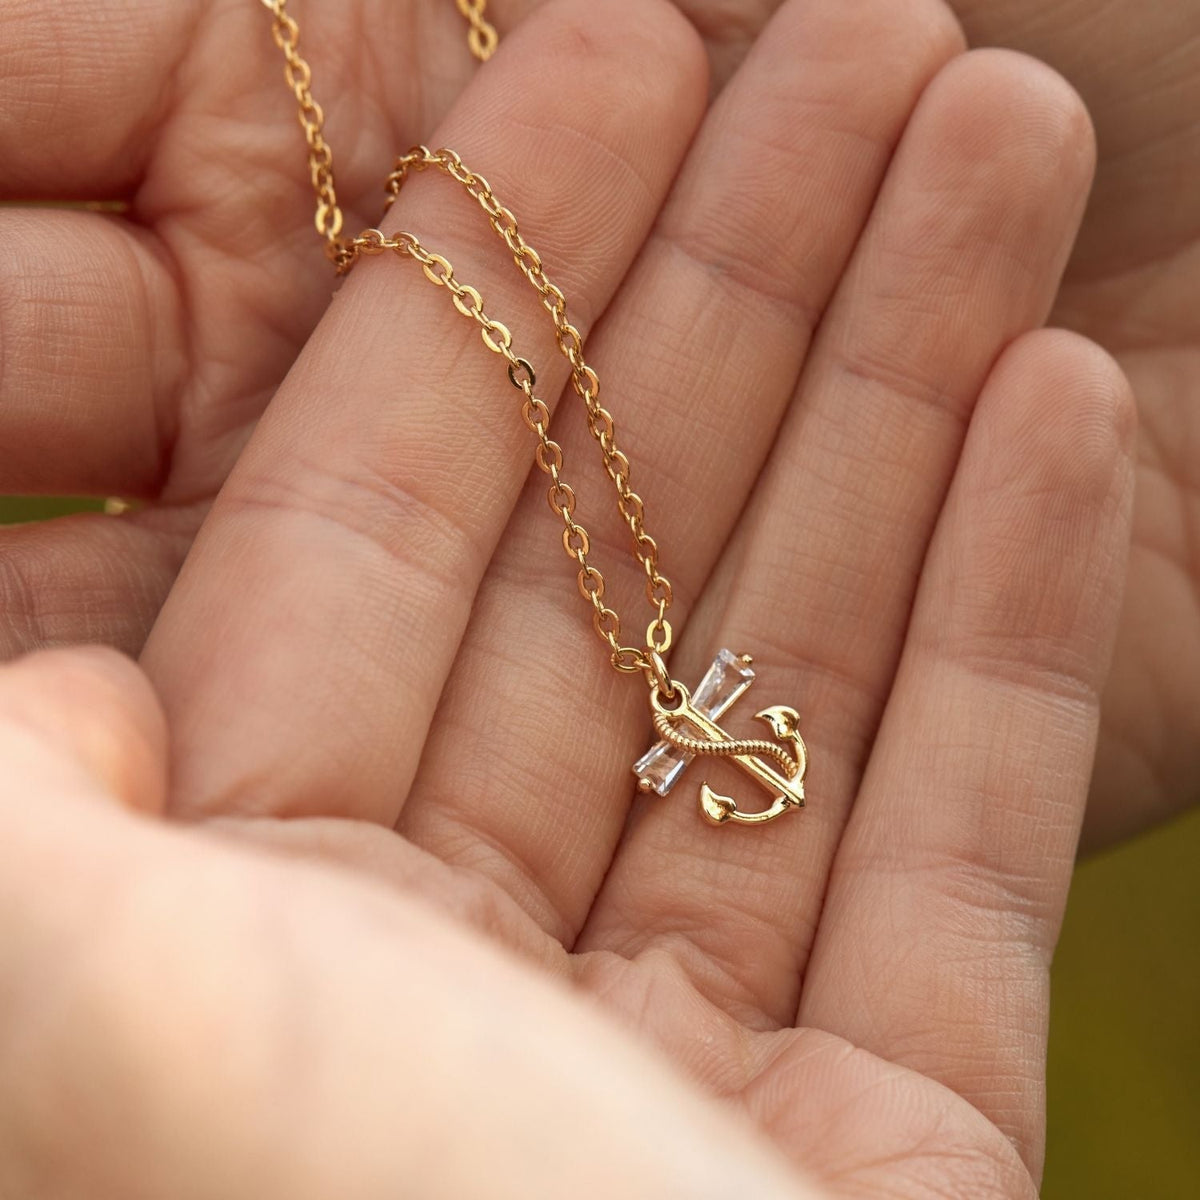 To My Big Sister | More Than a Forever Friend | Anchor Necklace